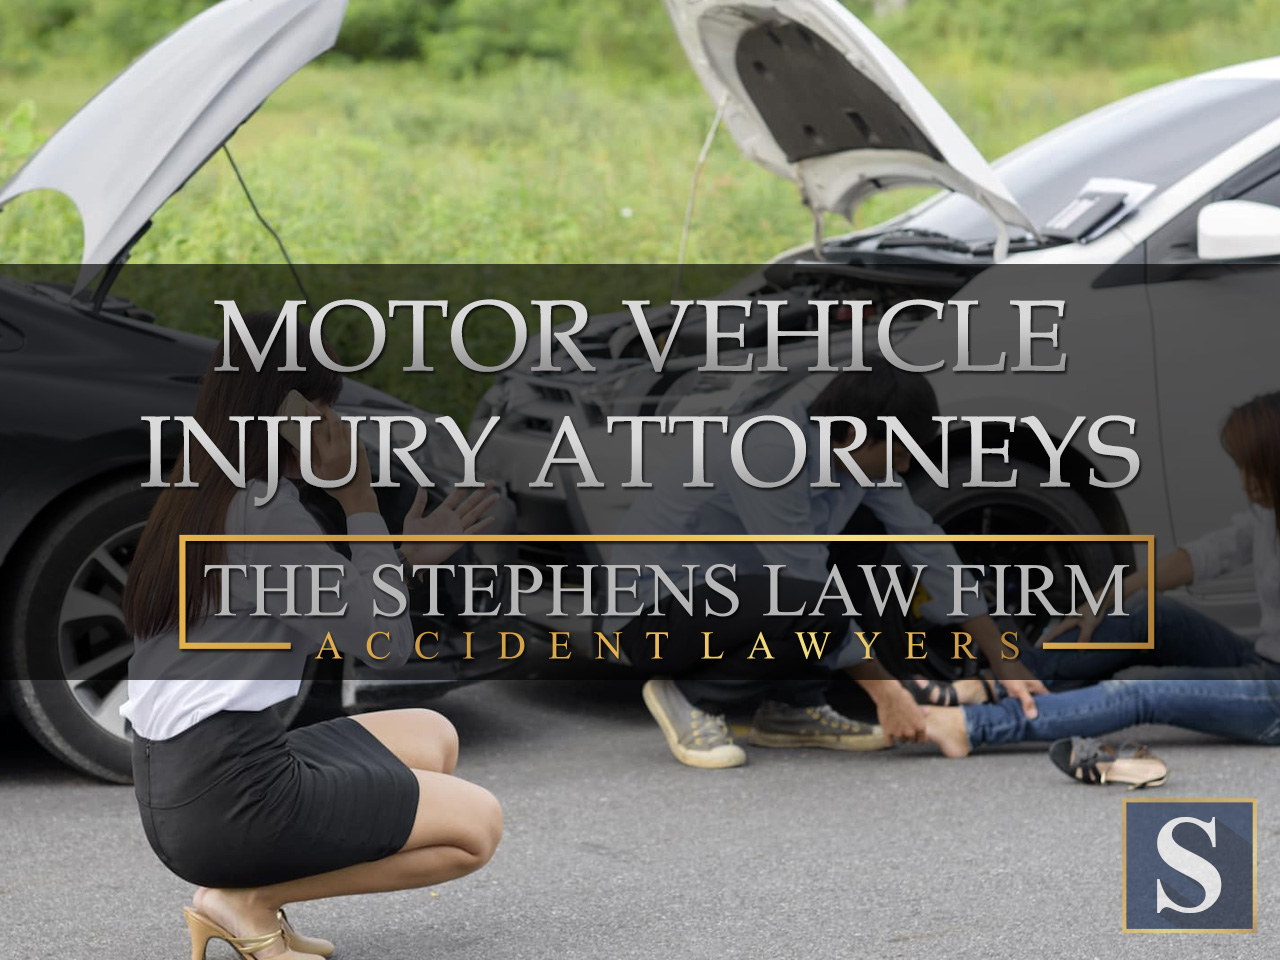 The Stephens Law Firm Accident Lawyers Katy, TX